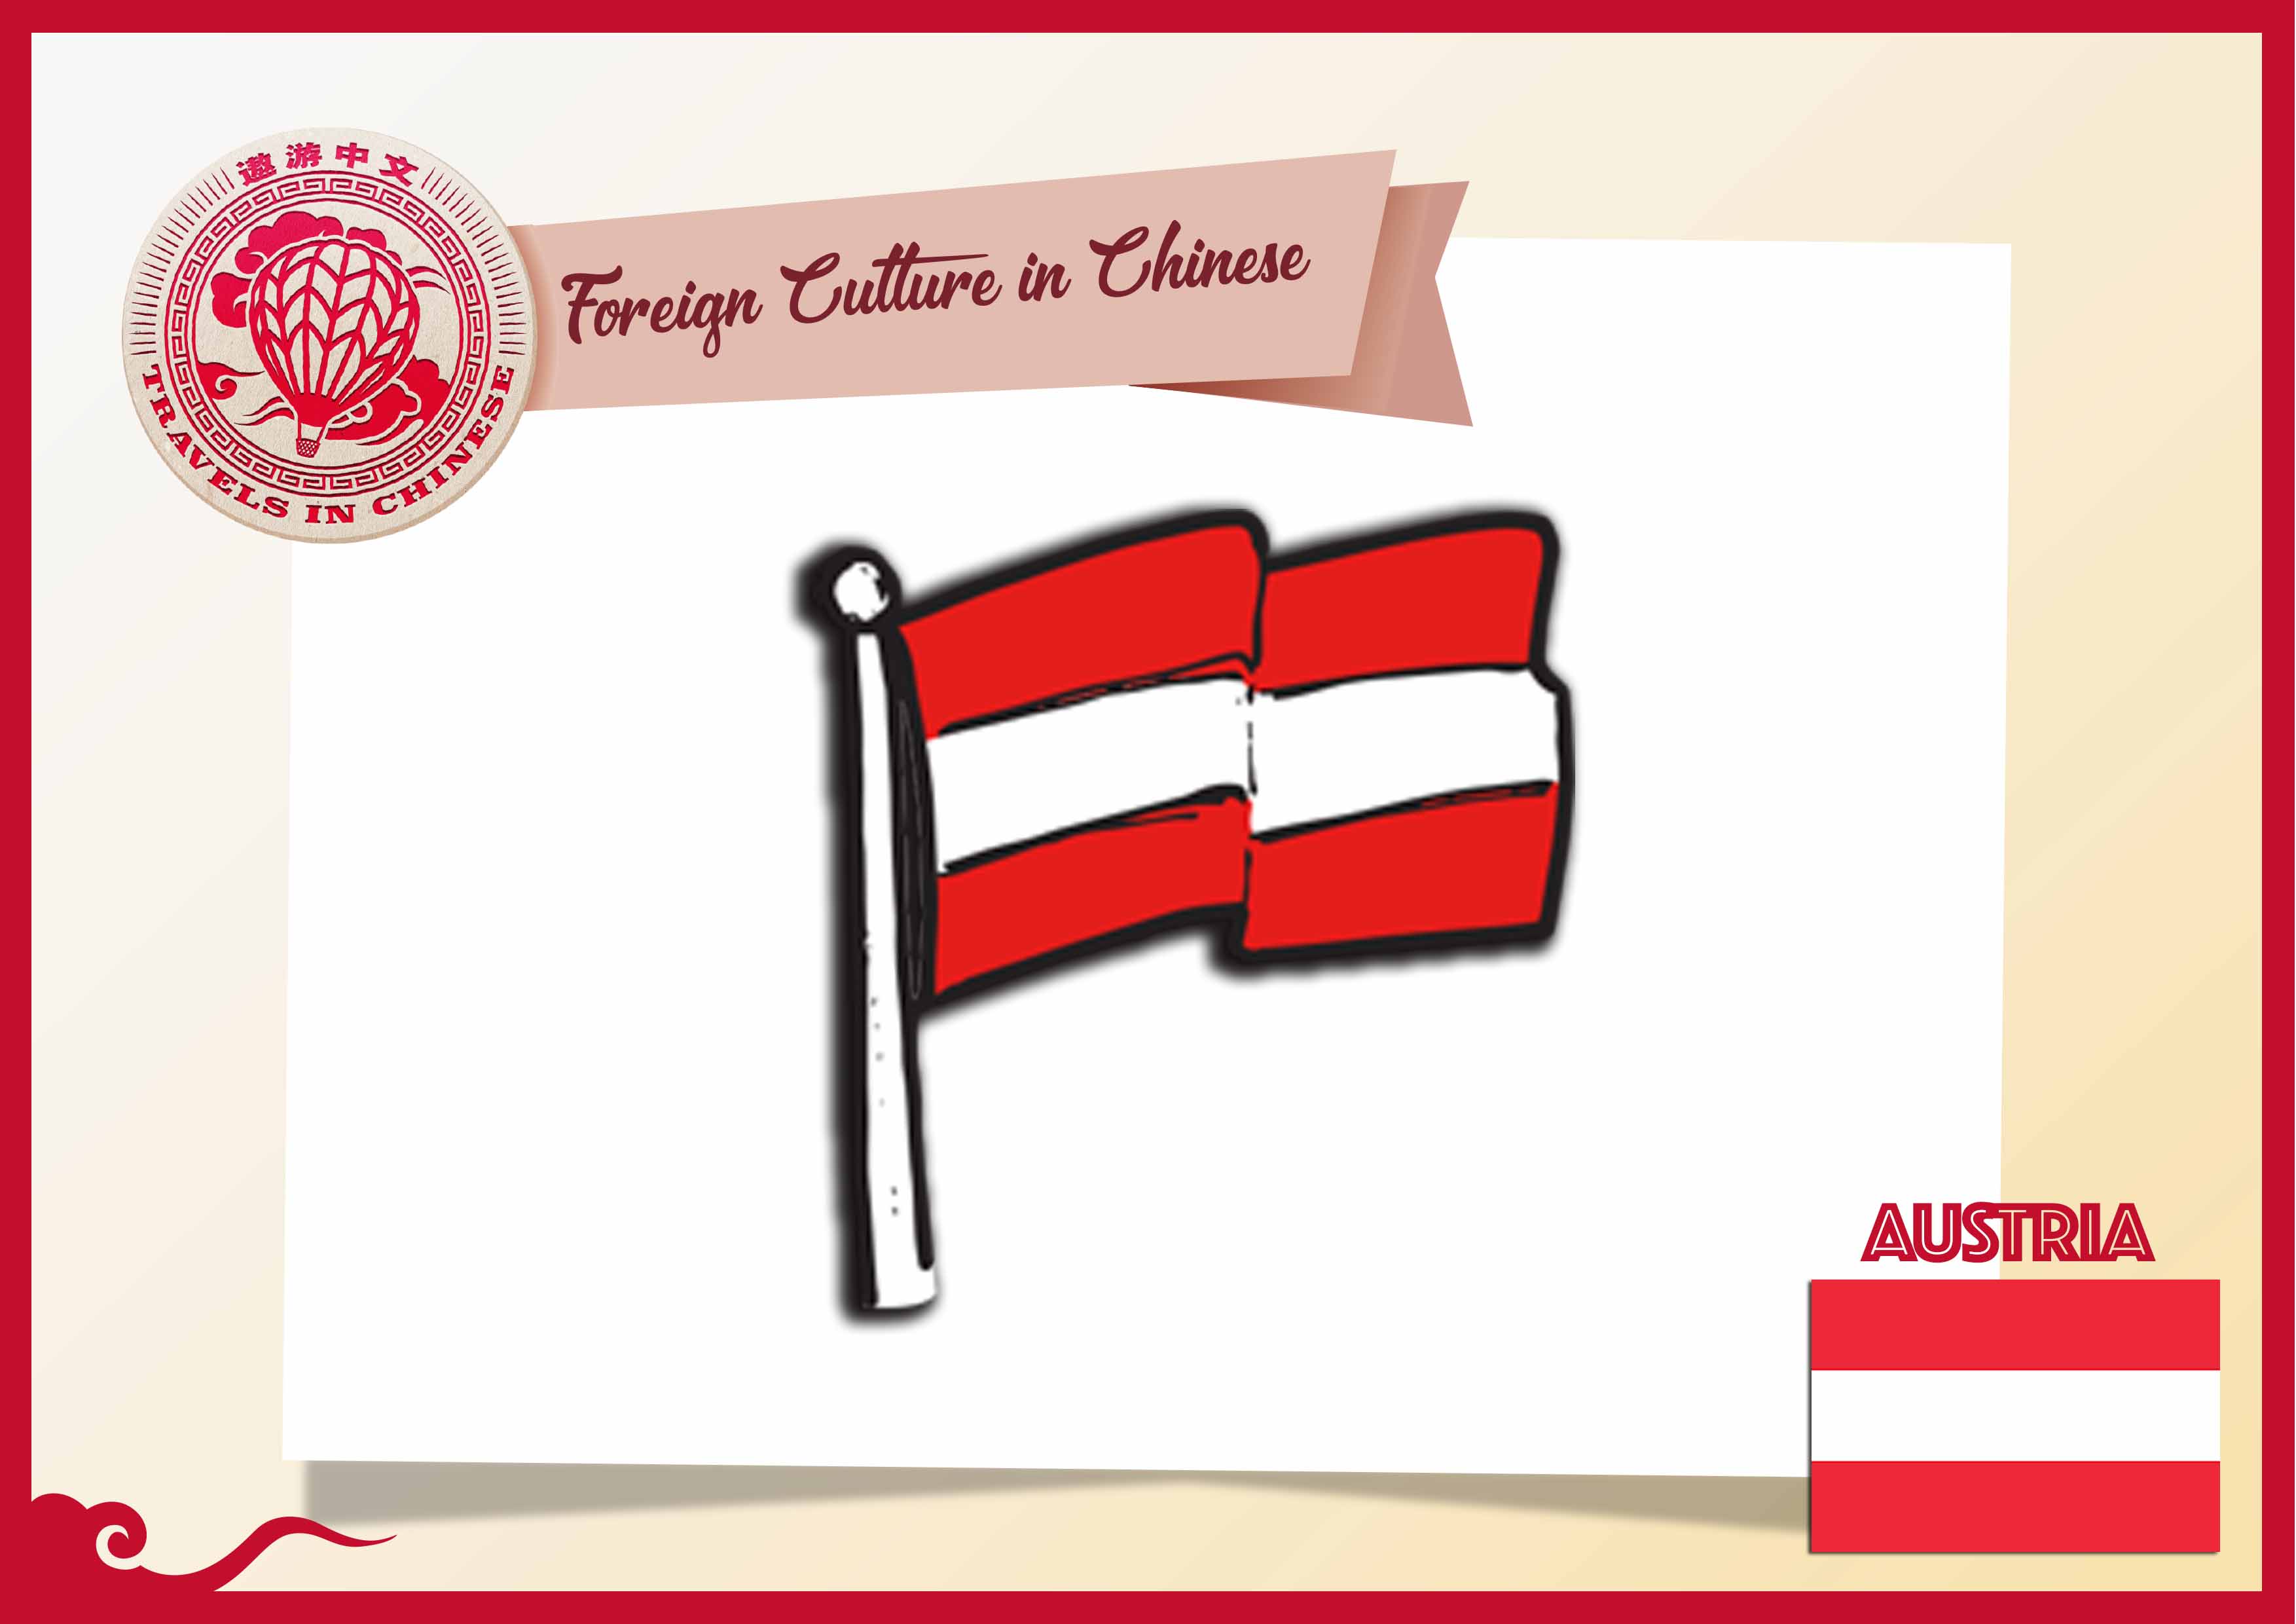 Travels In Chinese Foreign Cultures In Chinese Austria 奥地利 奥地利国旗是世界上最古老的国旗之一 The Austrian National Flag Is One Of The Oldest National Flags In The World T Co Teea8zsn2y Twitter